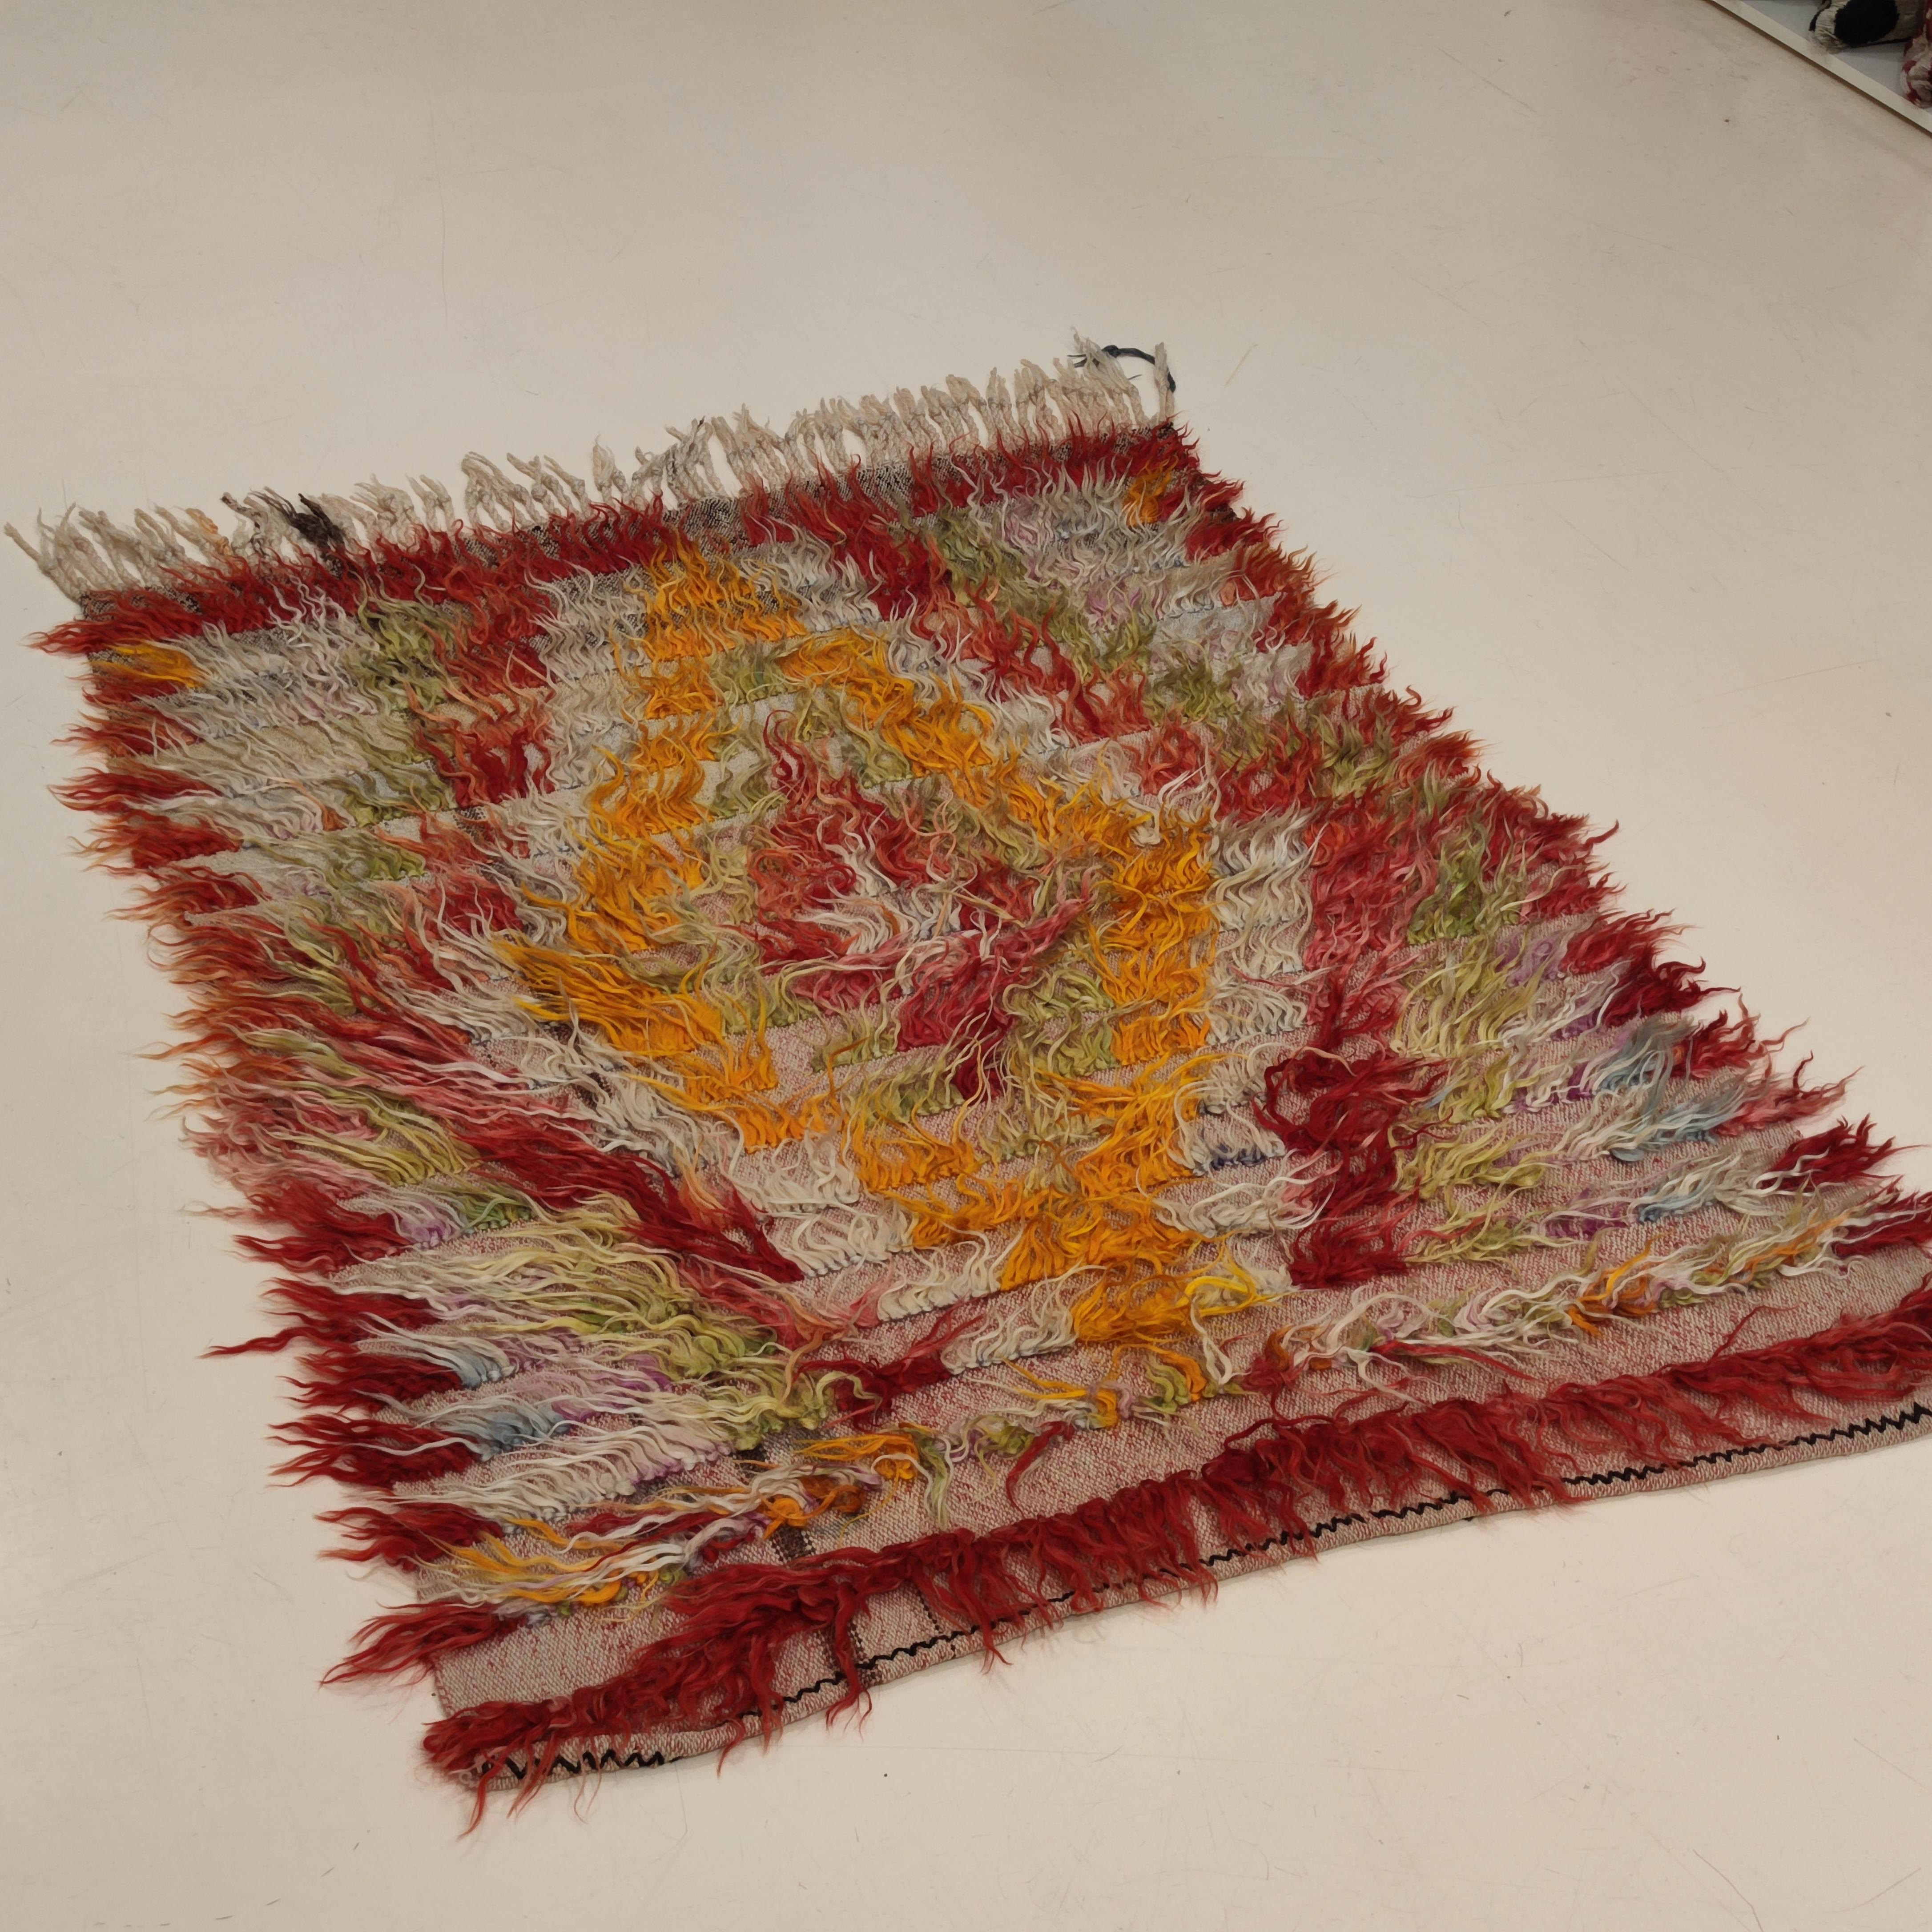 Filikli rugs represent probably the earliest, most primitive form of weaving known to mankind, veritably untouched over the course of a few thousand years. These were originally intended as a woven substitute to fur, hence the long fleecy pile.